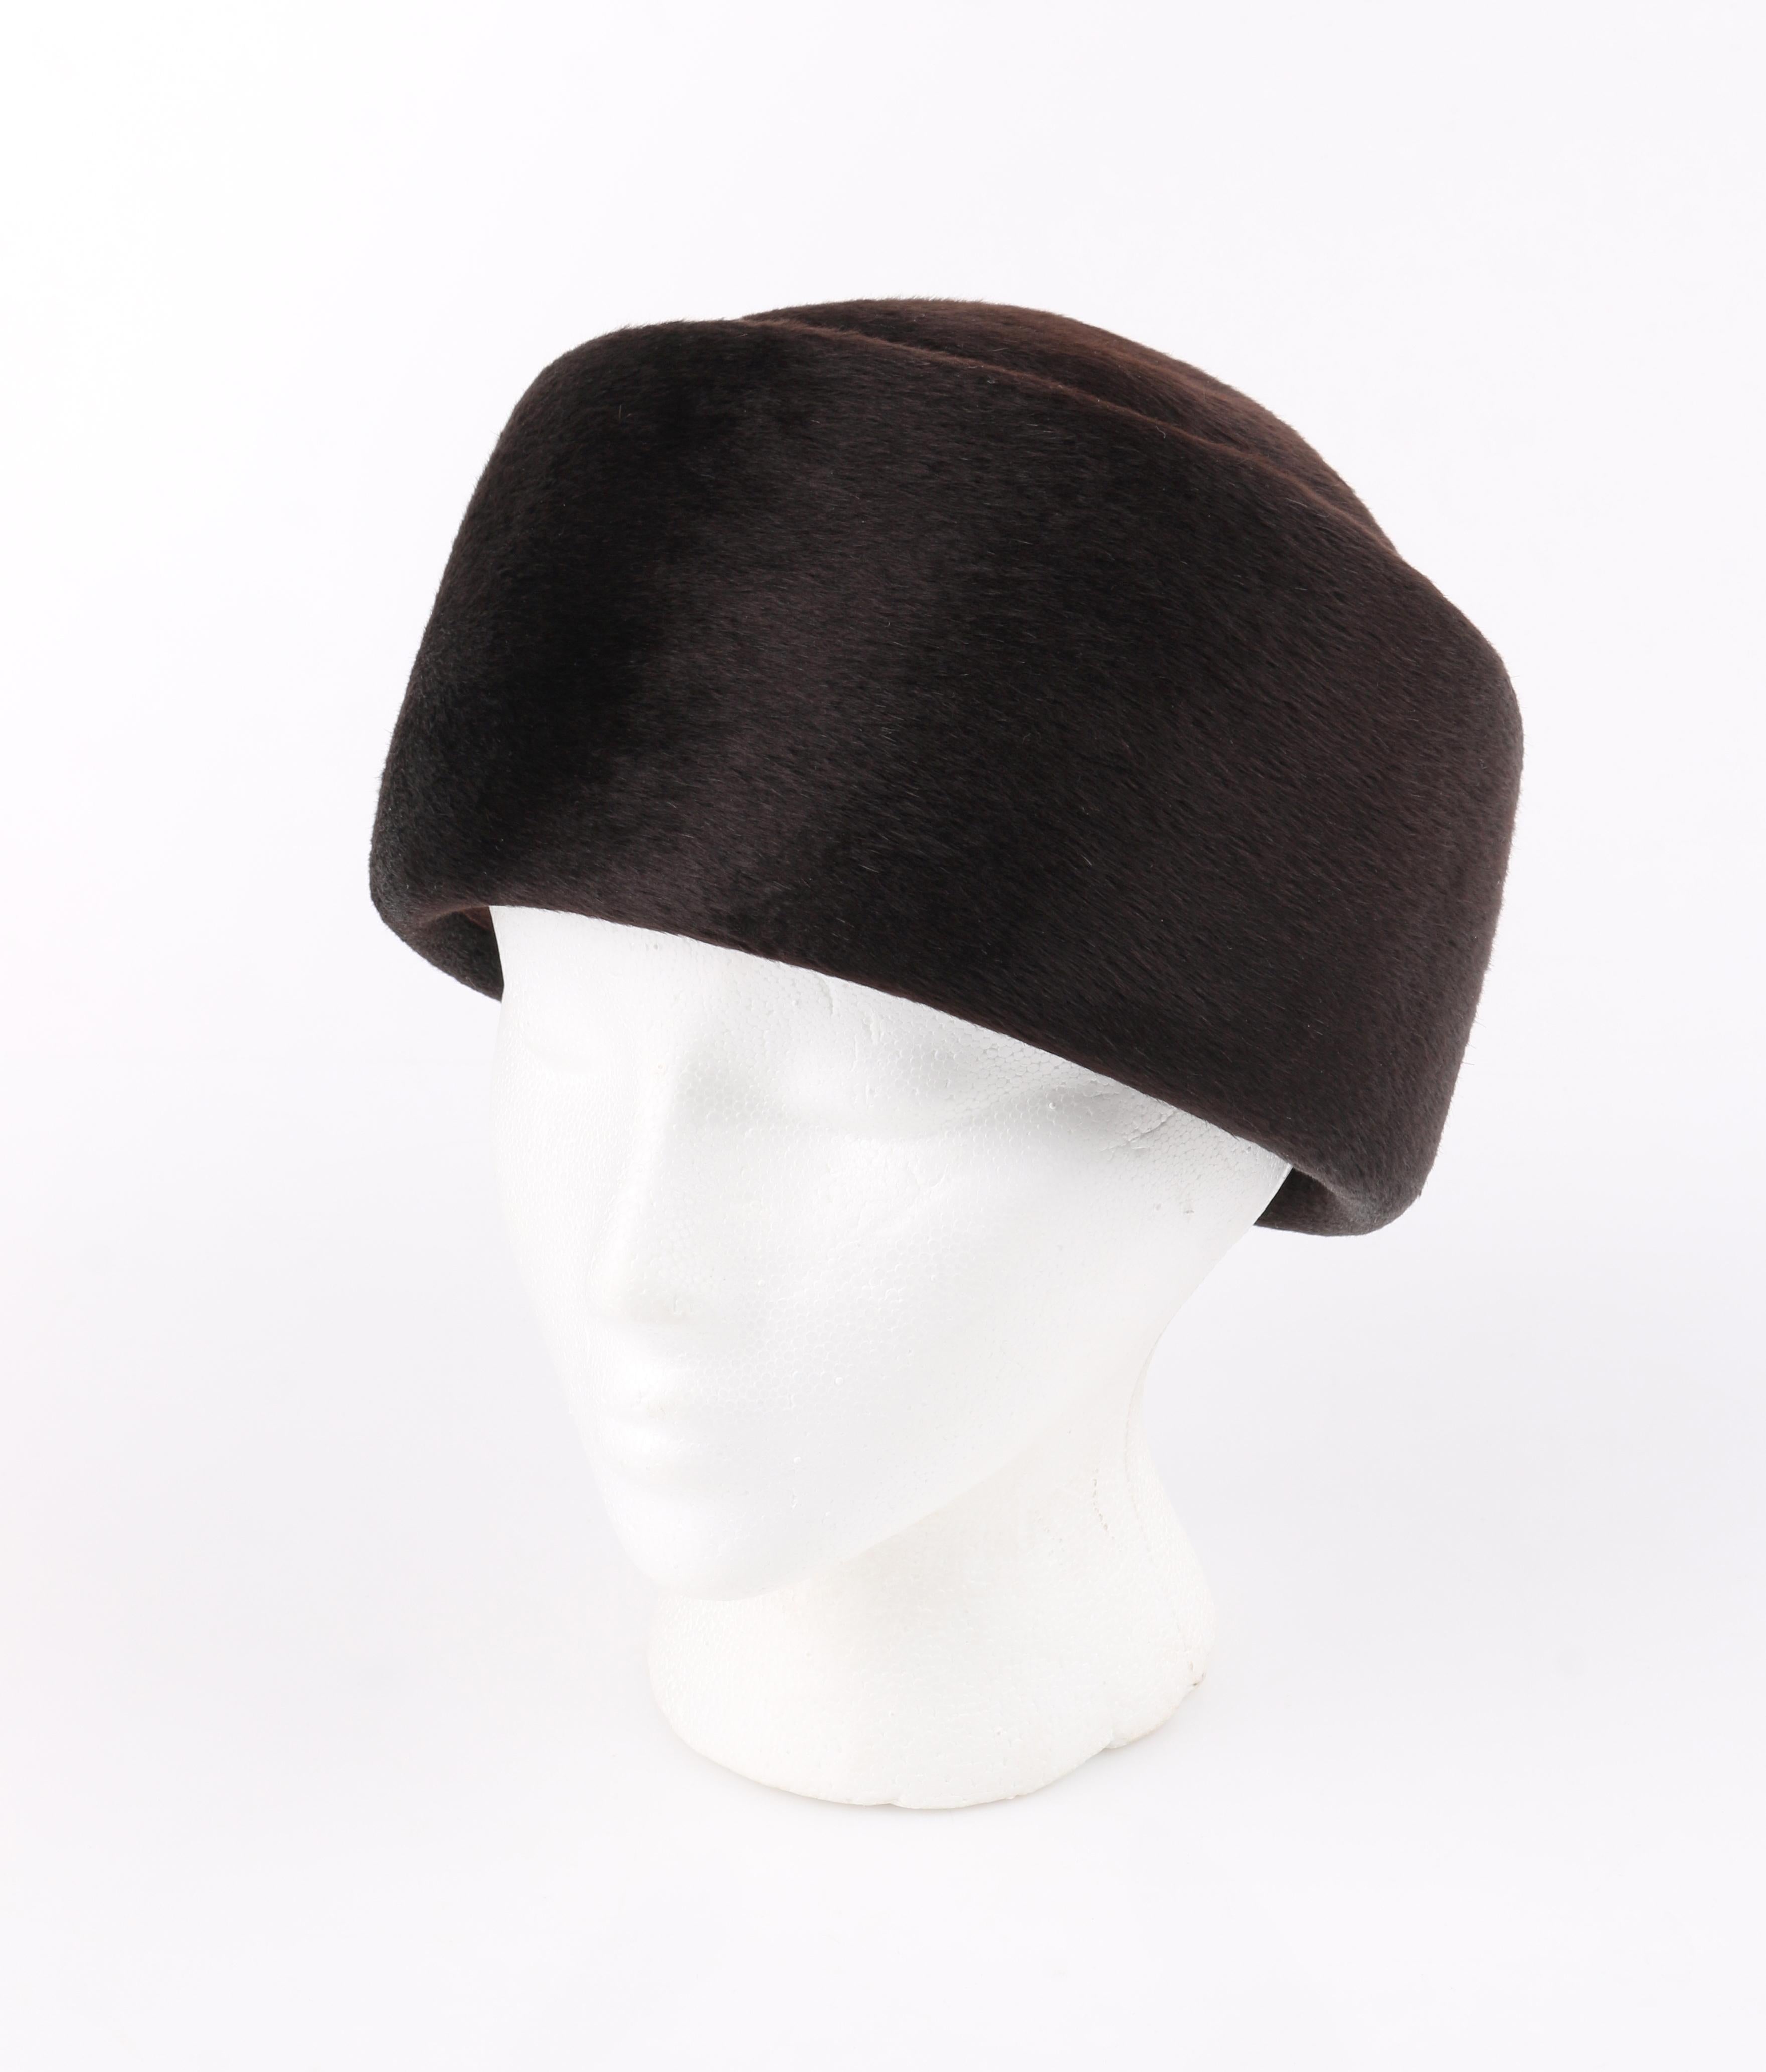 Miss Dior CHRISTIAN DIOR c.1960’s Marc Bohan Dark Brown Felted Fur Pillbox Hat 
 
Circa: 1960’s
Label(s): Miss Dior By Christian Dior
Designer: Marc Bohan
Style: Hat
Color(s): Brown
Lined: Yes 
Unmarked Fabric Content: Felted Fur (exterior);